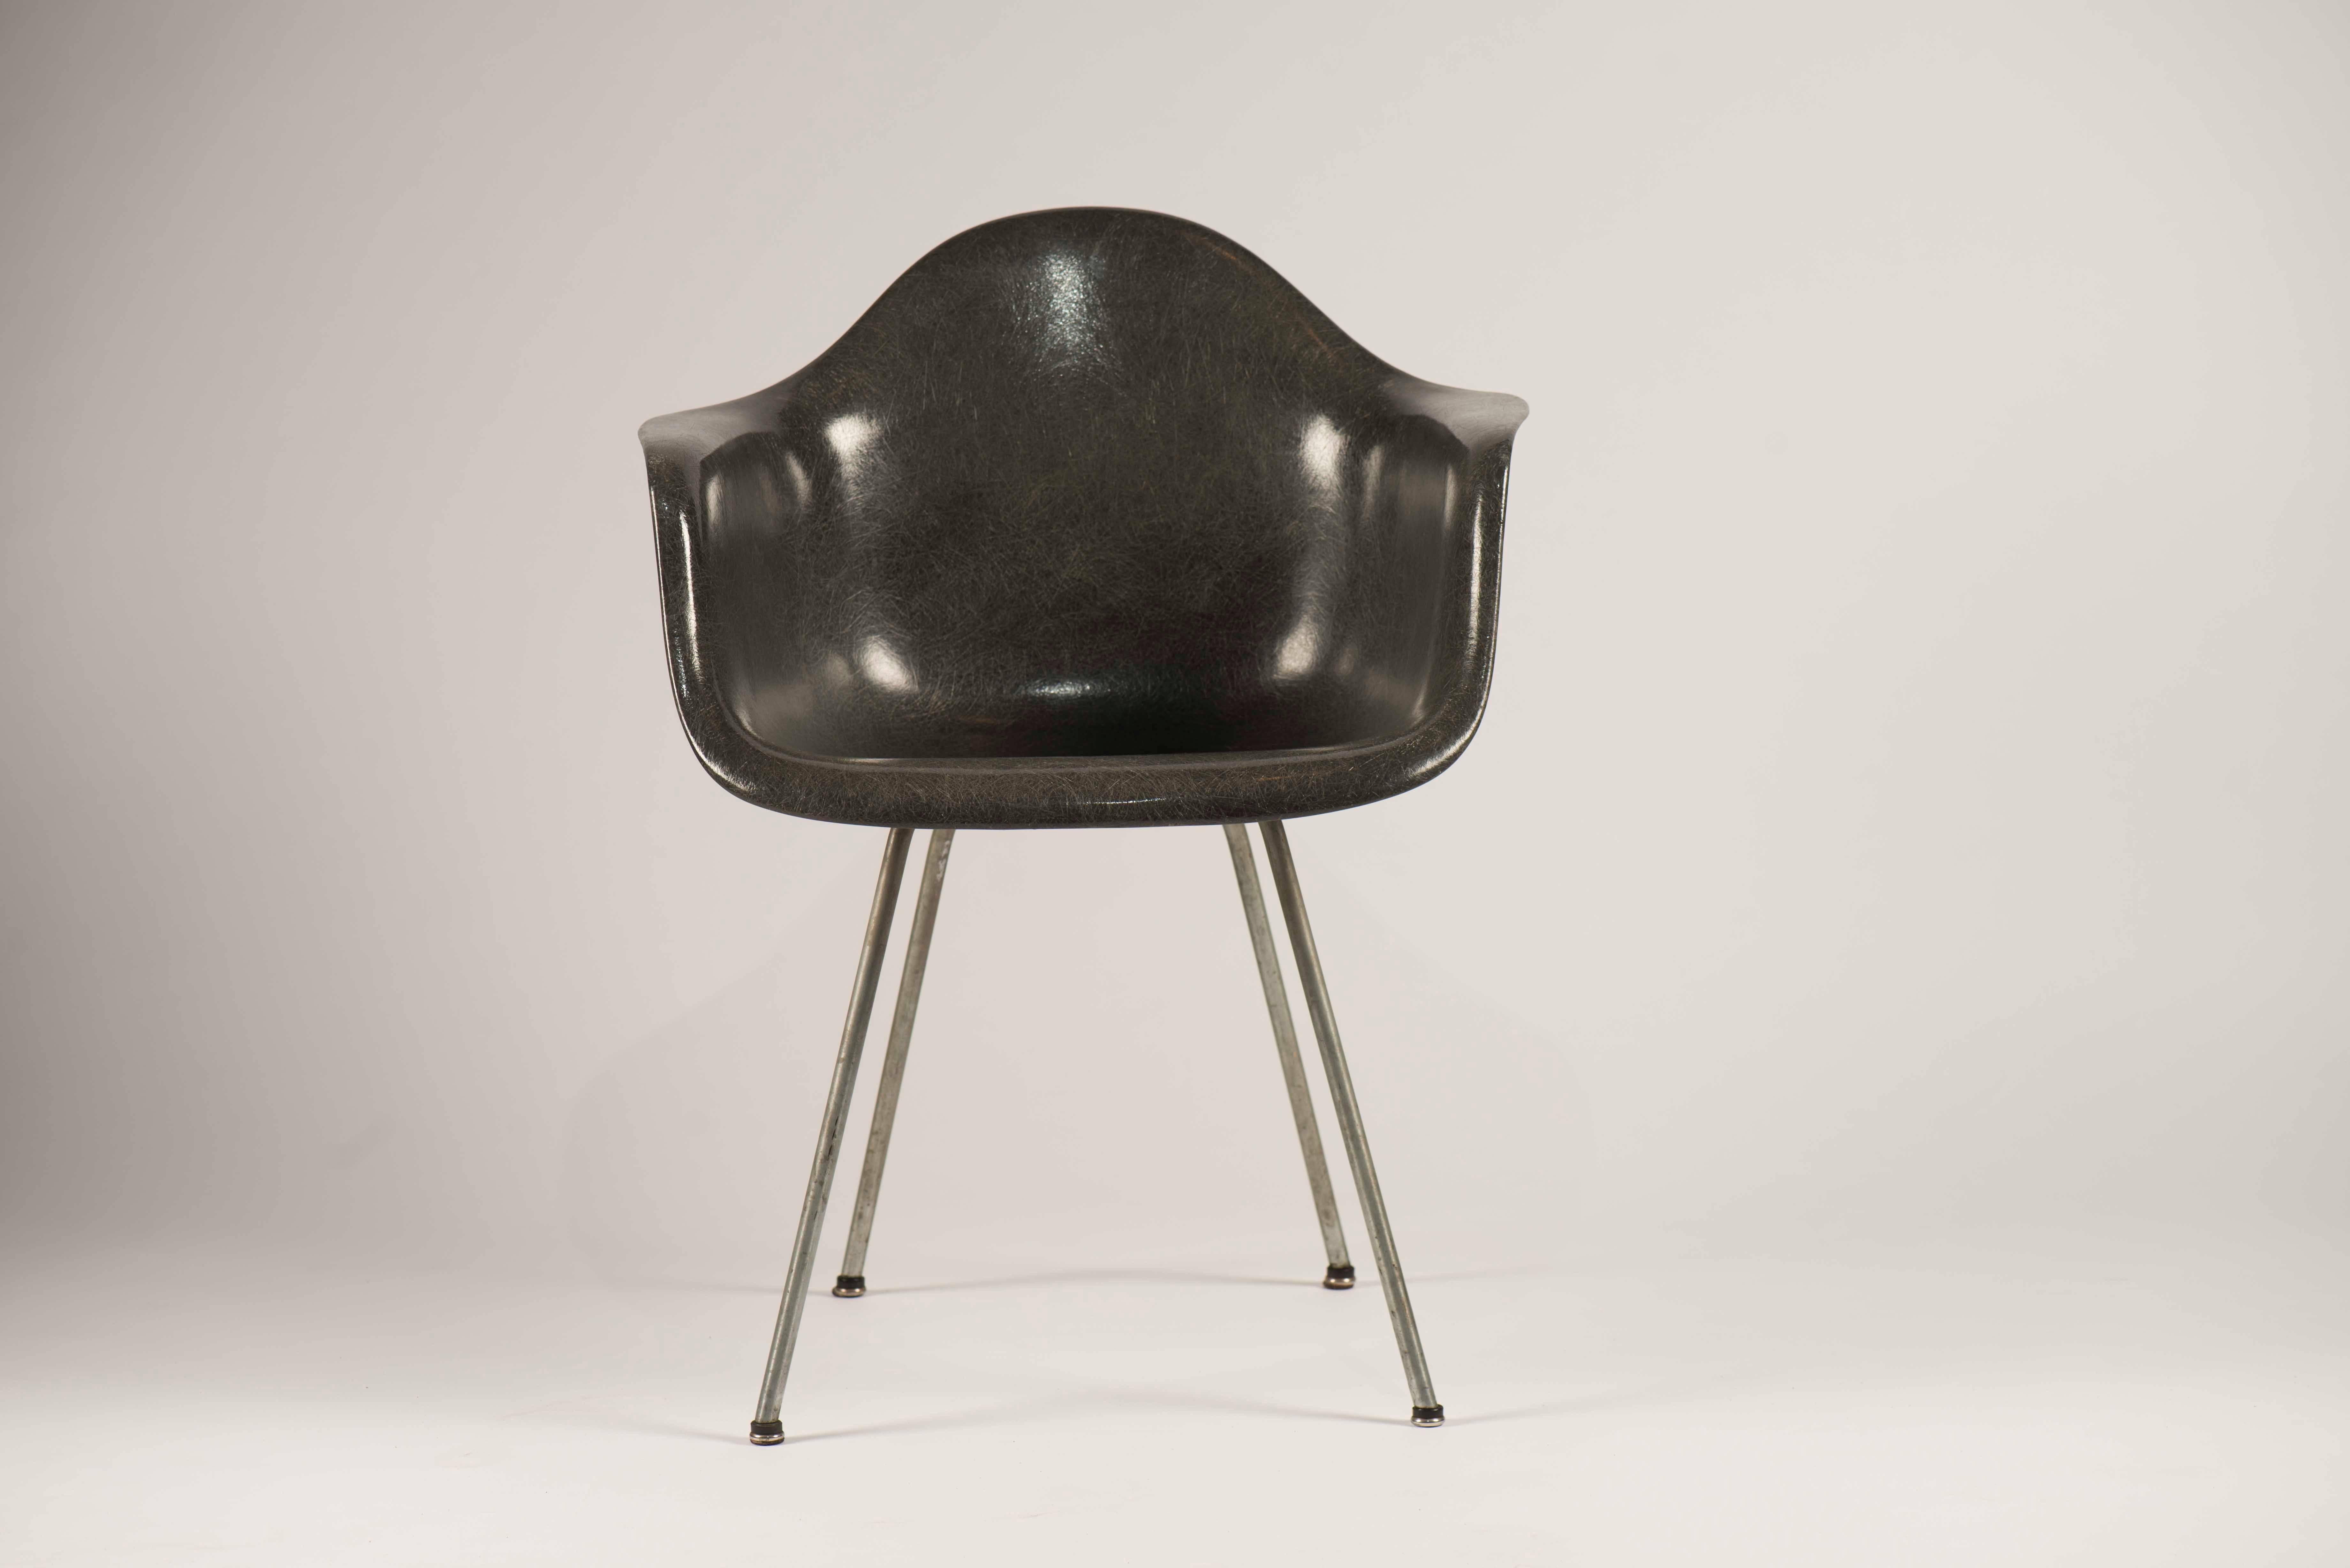 An excellent example of the earliest, 1950s fiberglass chairs designed by the office of Charles Eames, manufactured by Zenith Plastics and distributed by Herman Miller. This chair features the signature checkerboard label, large shock mounts Domes